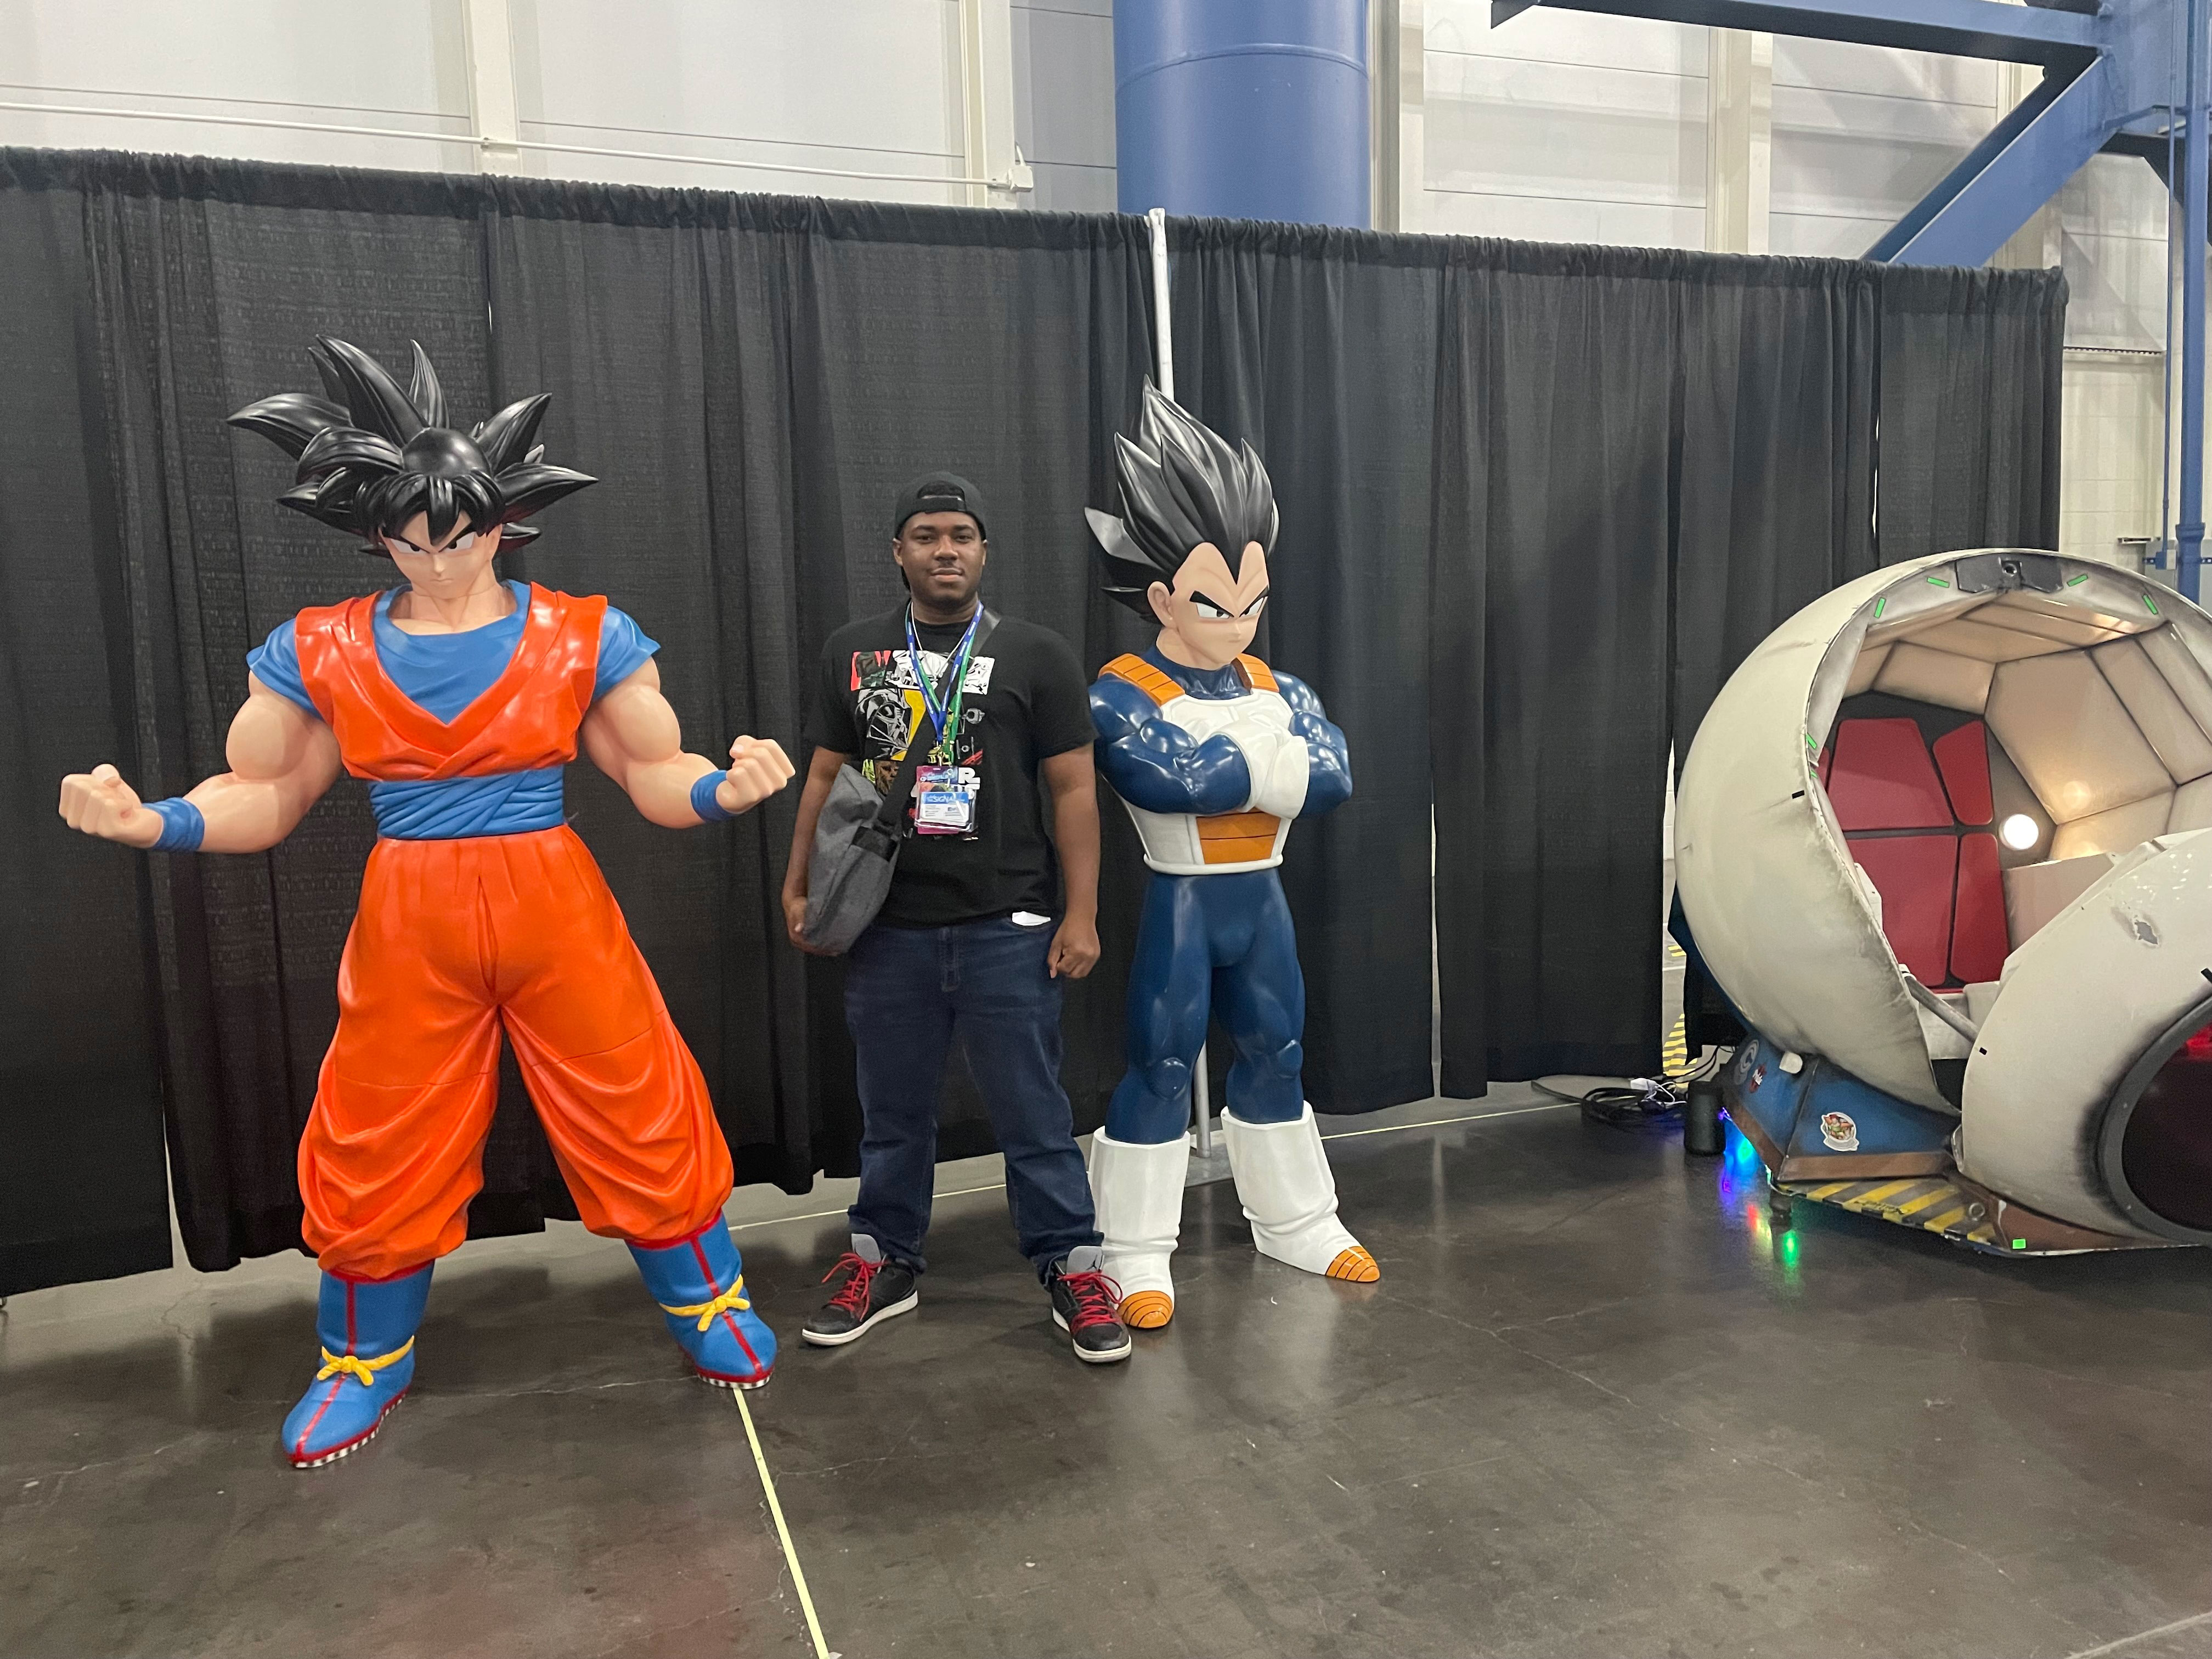 PHOTO: Image depicts boy with bag between two life sized statues of Dragon Ball characters Goku and Vegeta. They stand in front of black curtains next to a replica of a fictional space pod. Photo by The Signal Managing Editor of Content and Operations Troylon Griffin II.